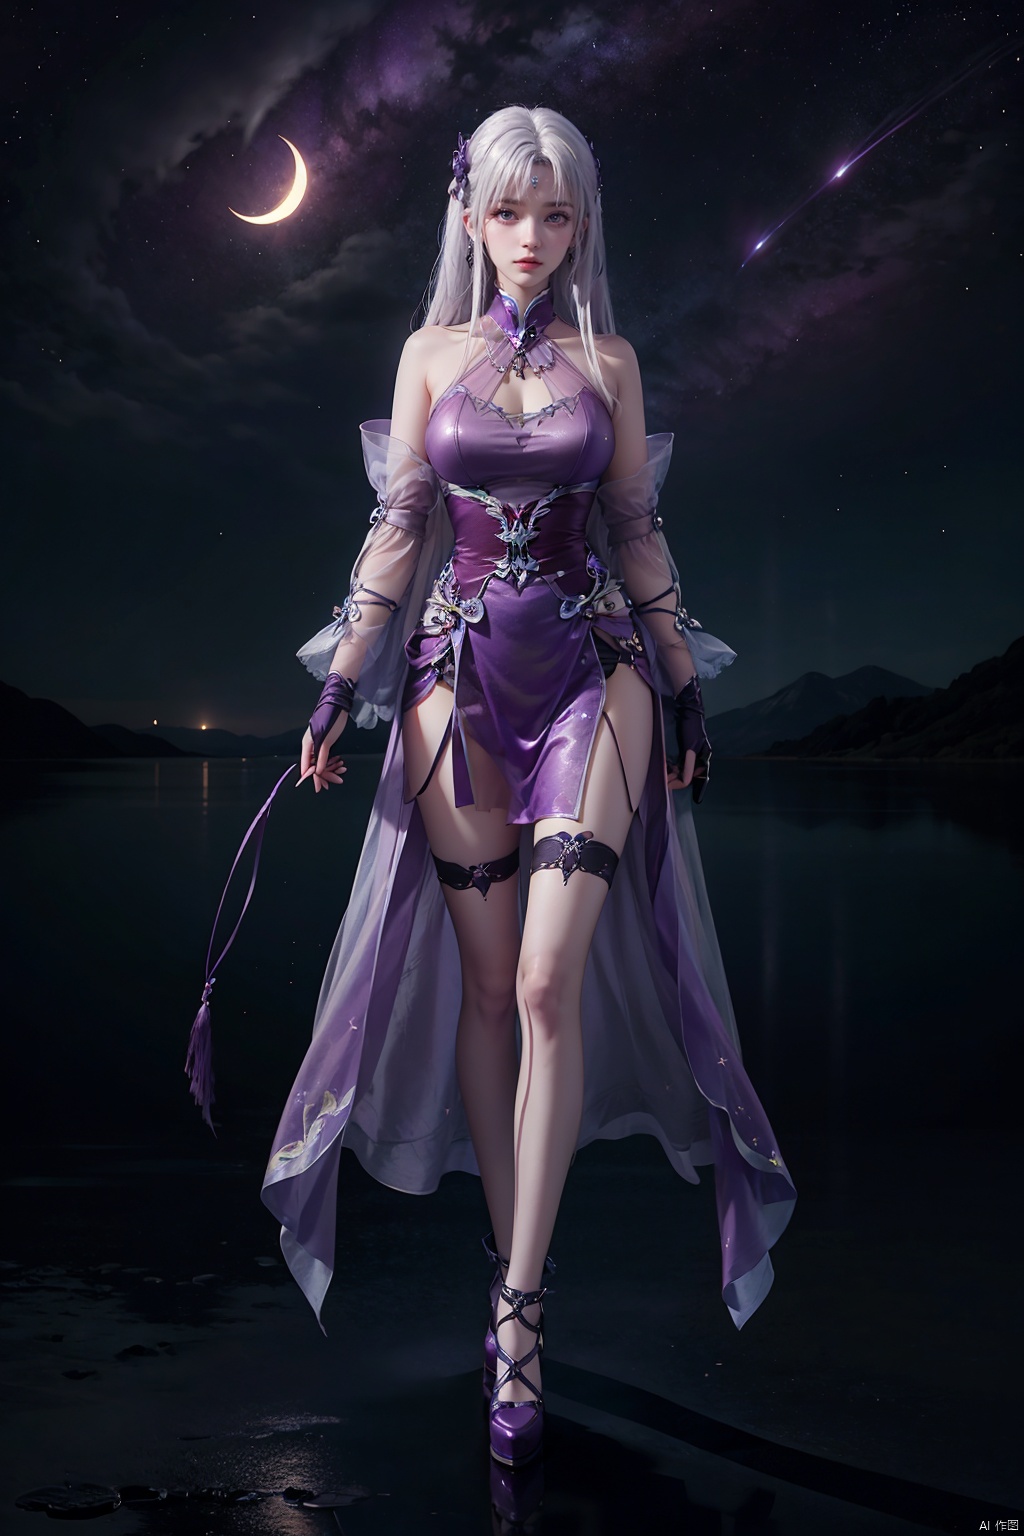  1girl, aurora, bare_shoulders, city_lights, constellation, crescent_moon, galaxy, , light_particles, long_hair, milky_way, moon, moonlight, night, night_sky, planet, purple_sky, shooting_star, sky, sleeveless, solo, space,long hair, white hair, solo, breasts,,full body,purple eyes,  full body, xiaoyixian, ((poakl)),black fishnets,babydoll